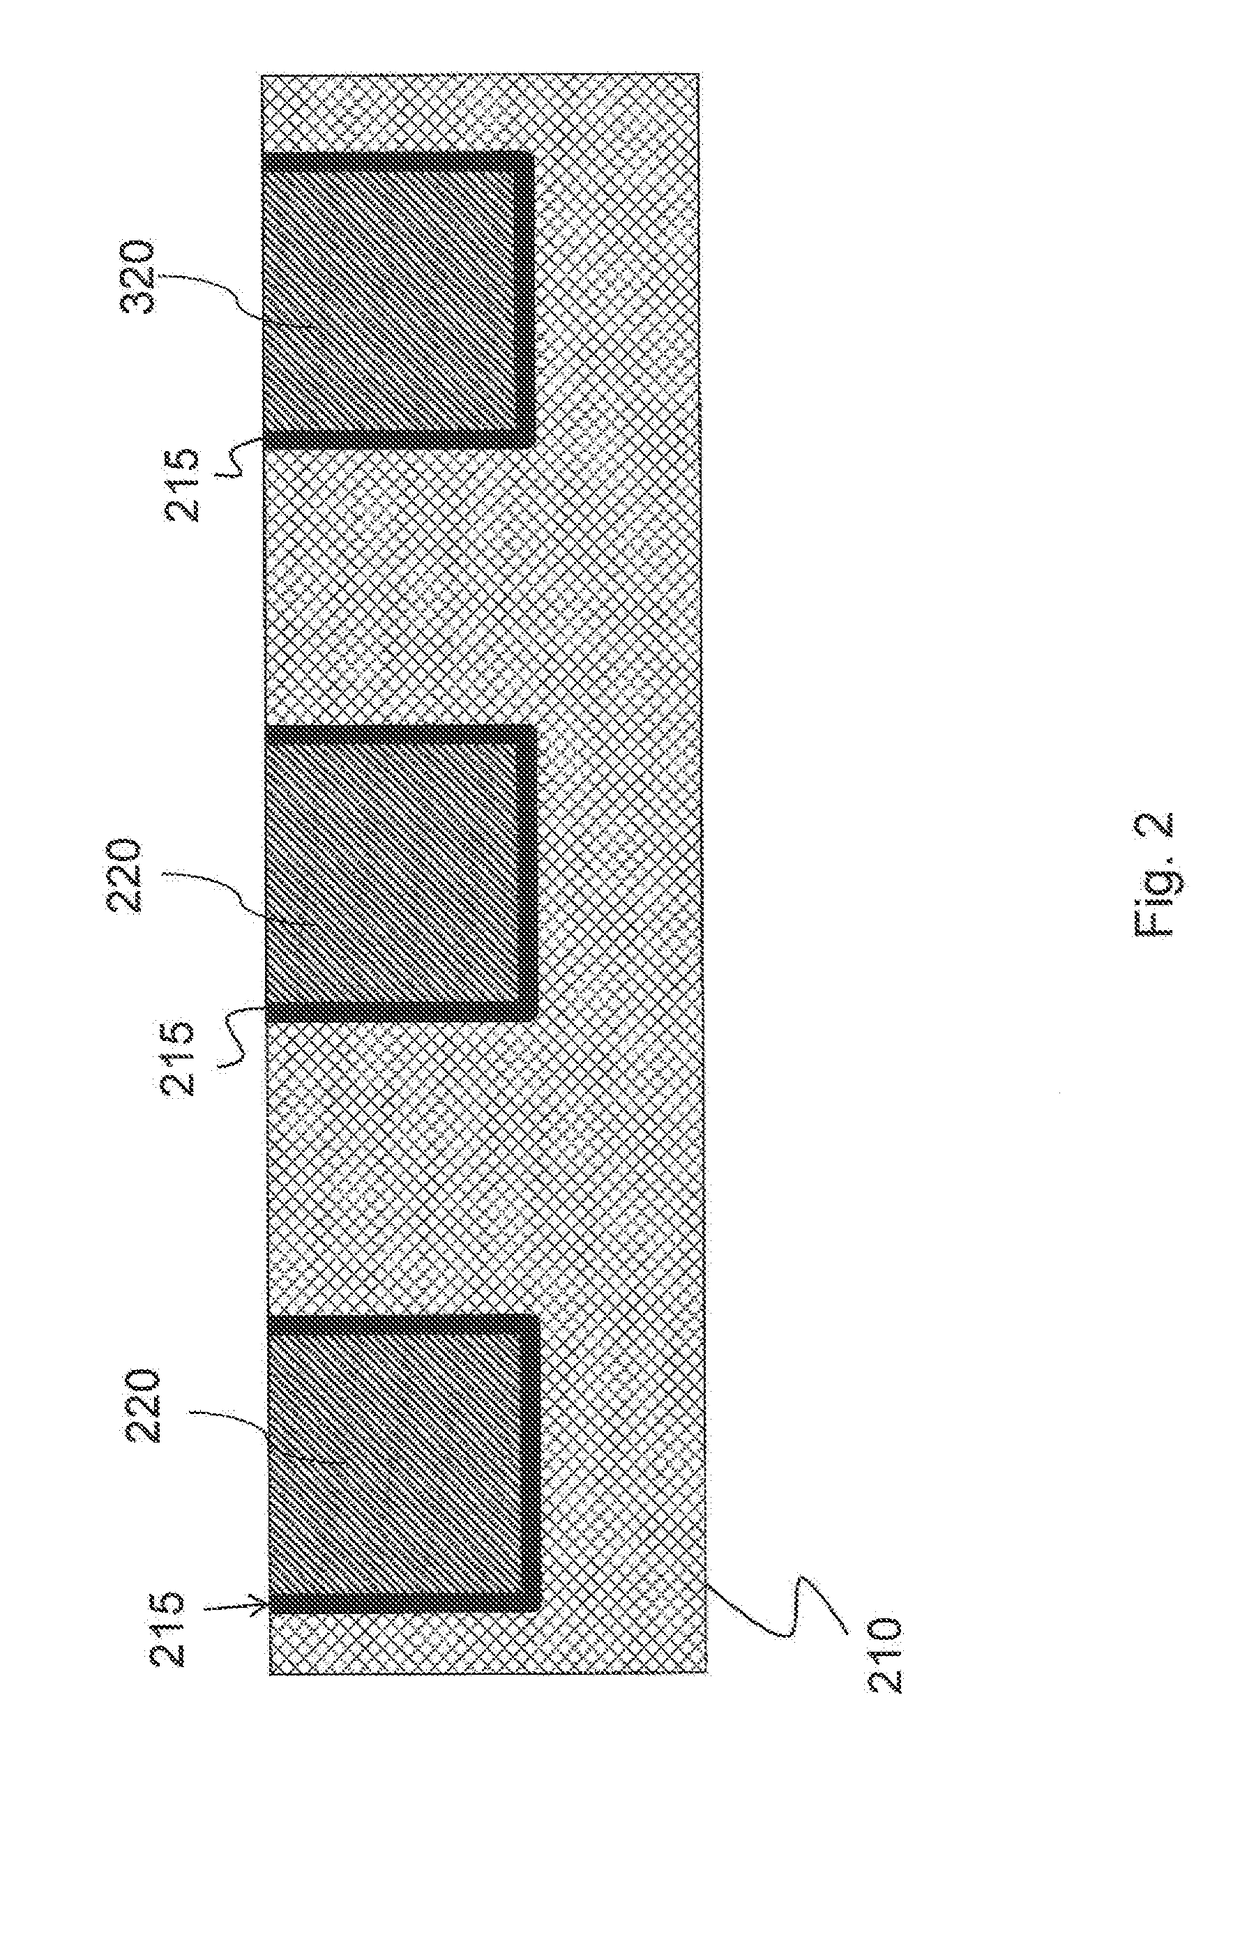 Structure and process for metal cap integration